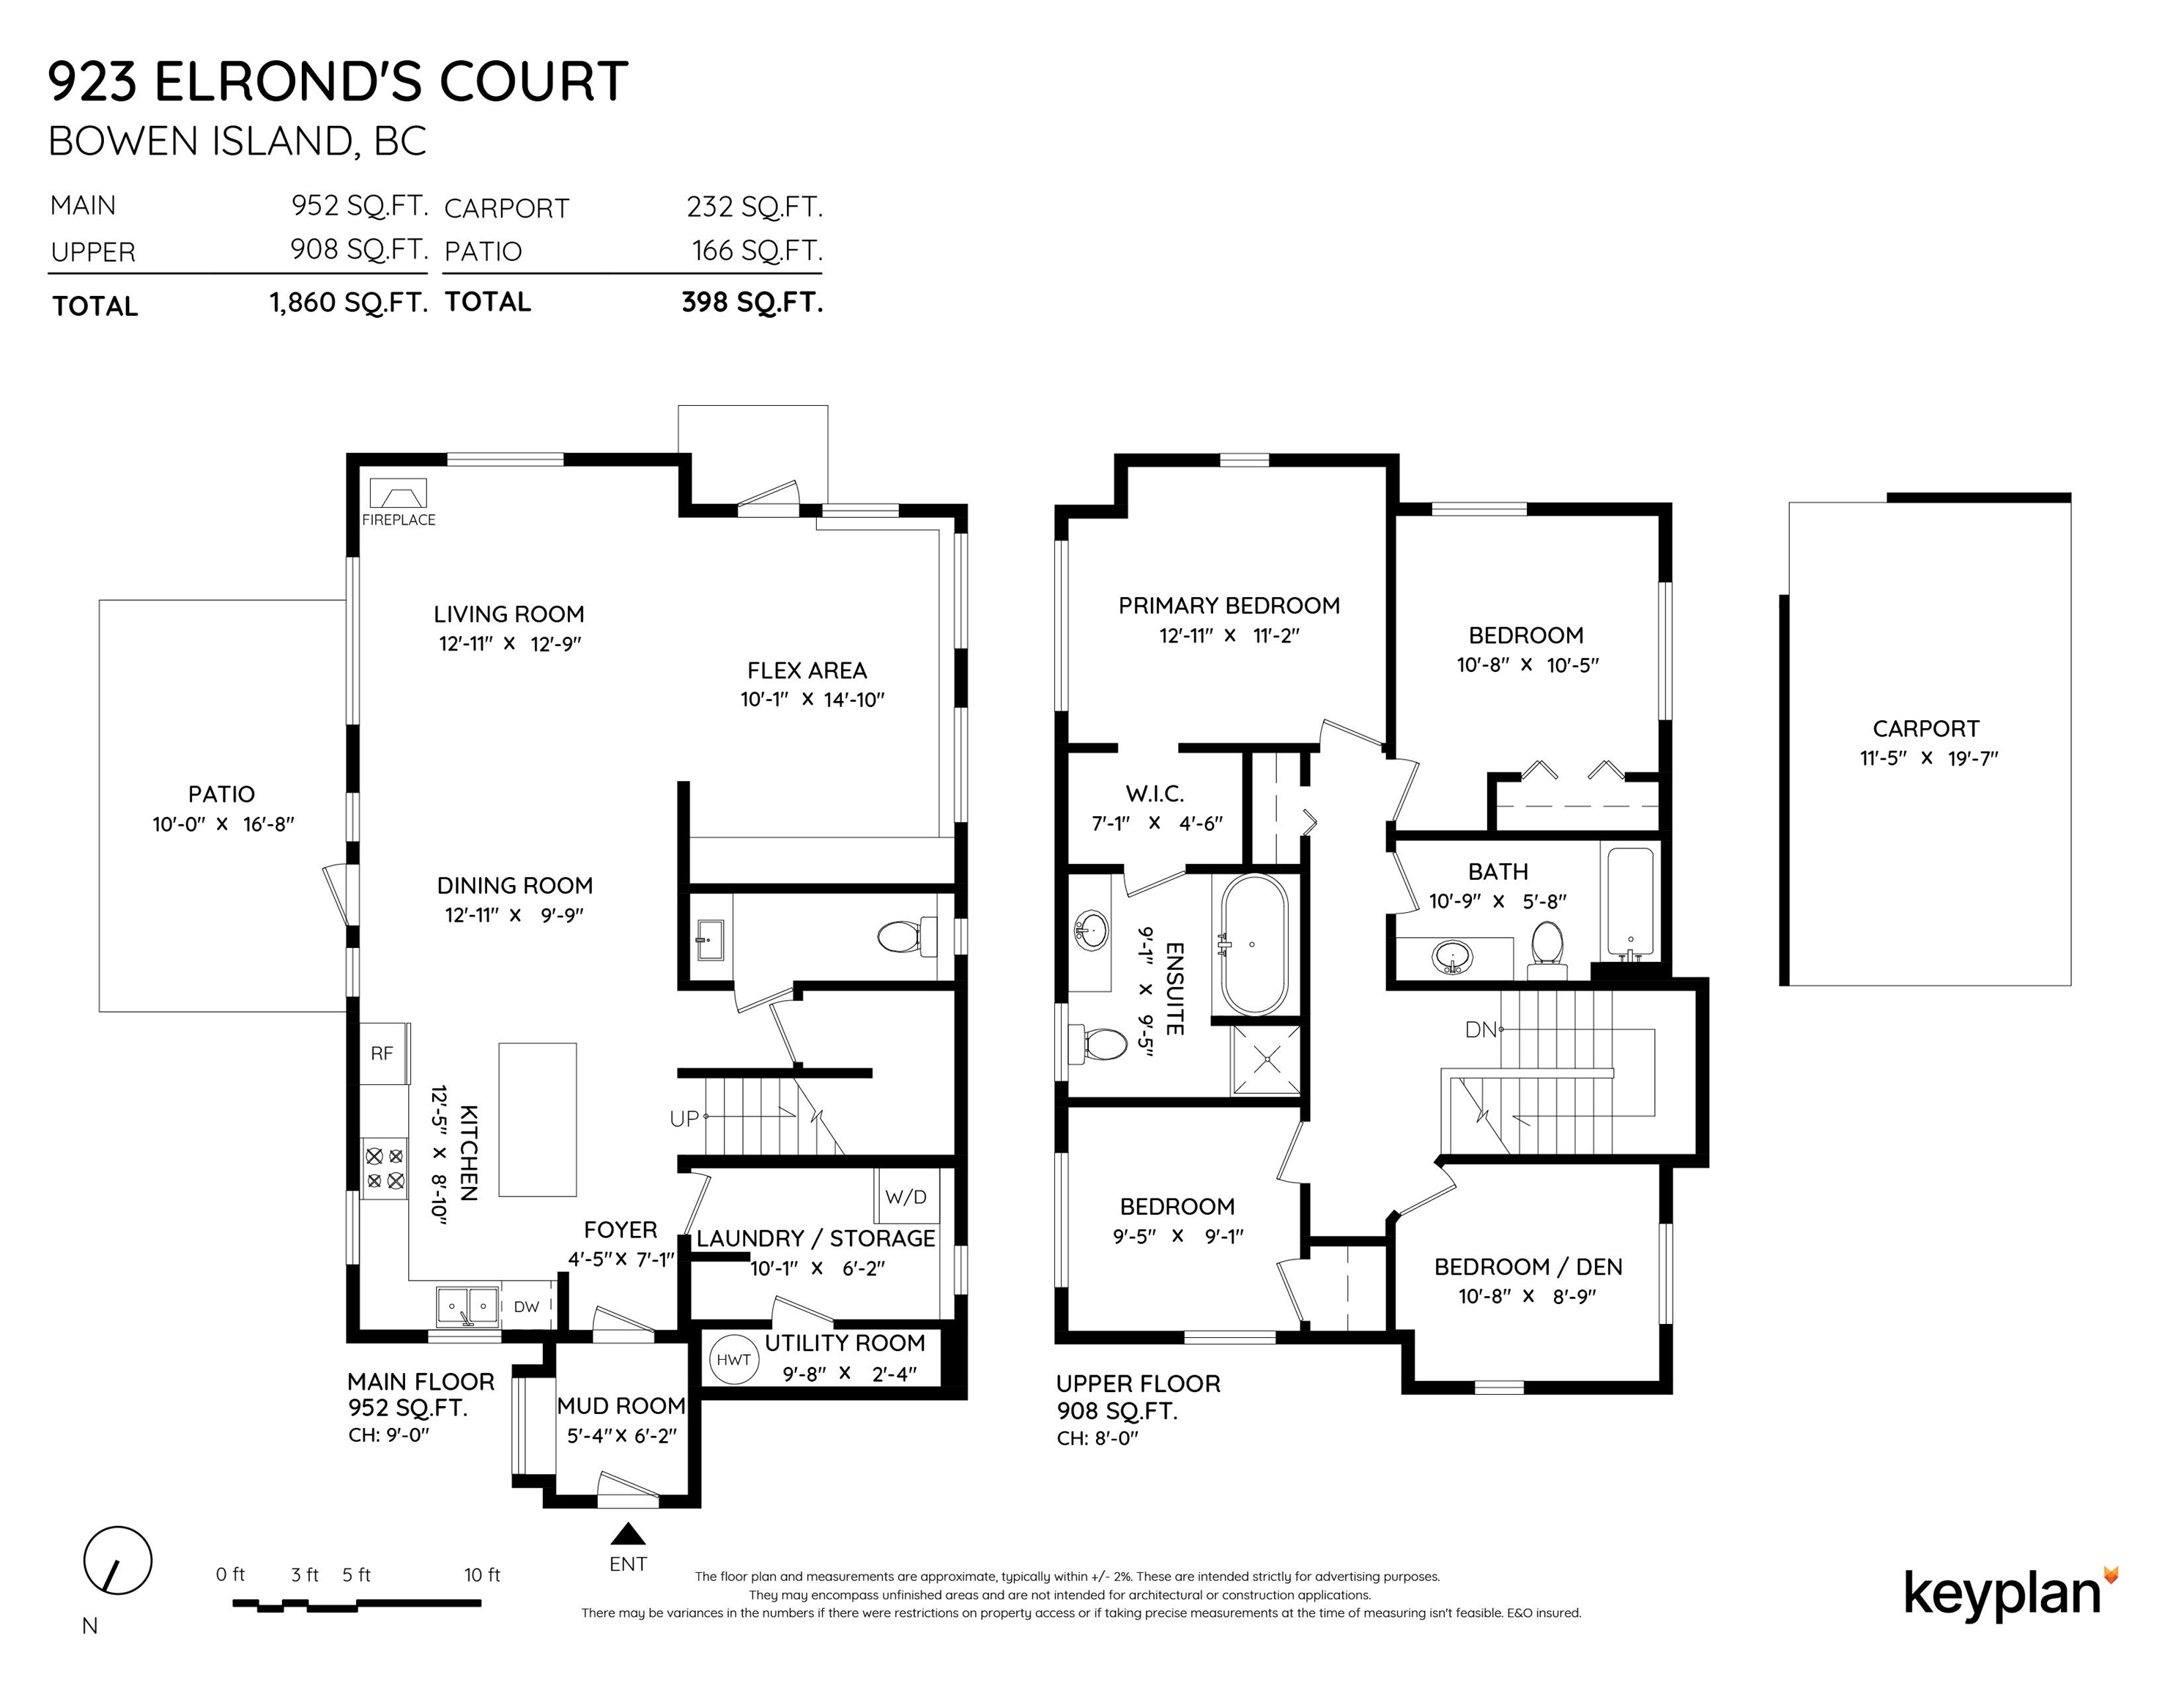 Listing image of 923 ELROND'S COURT